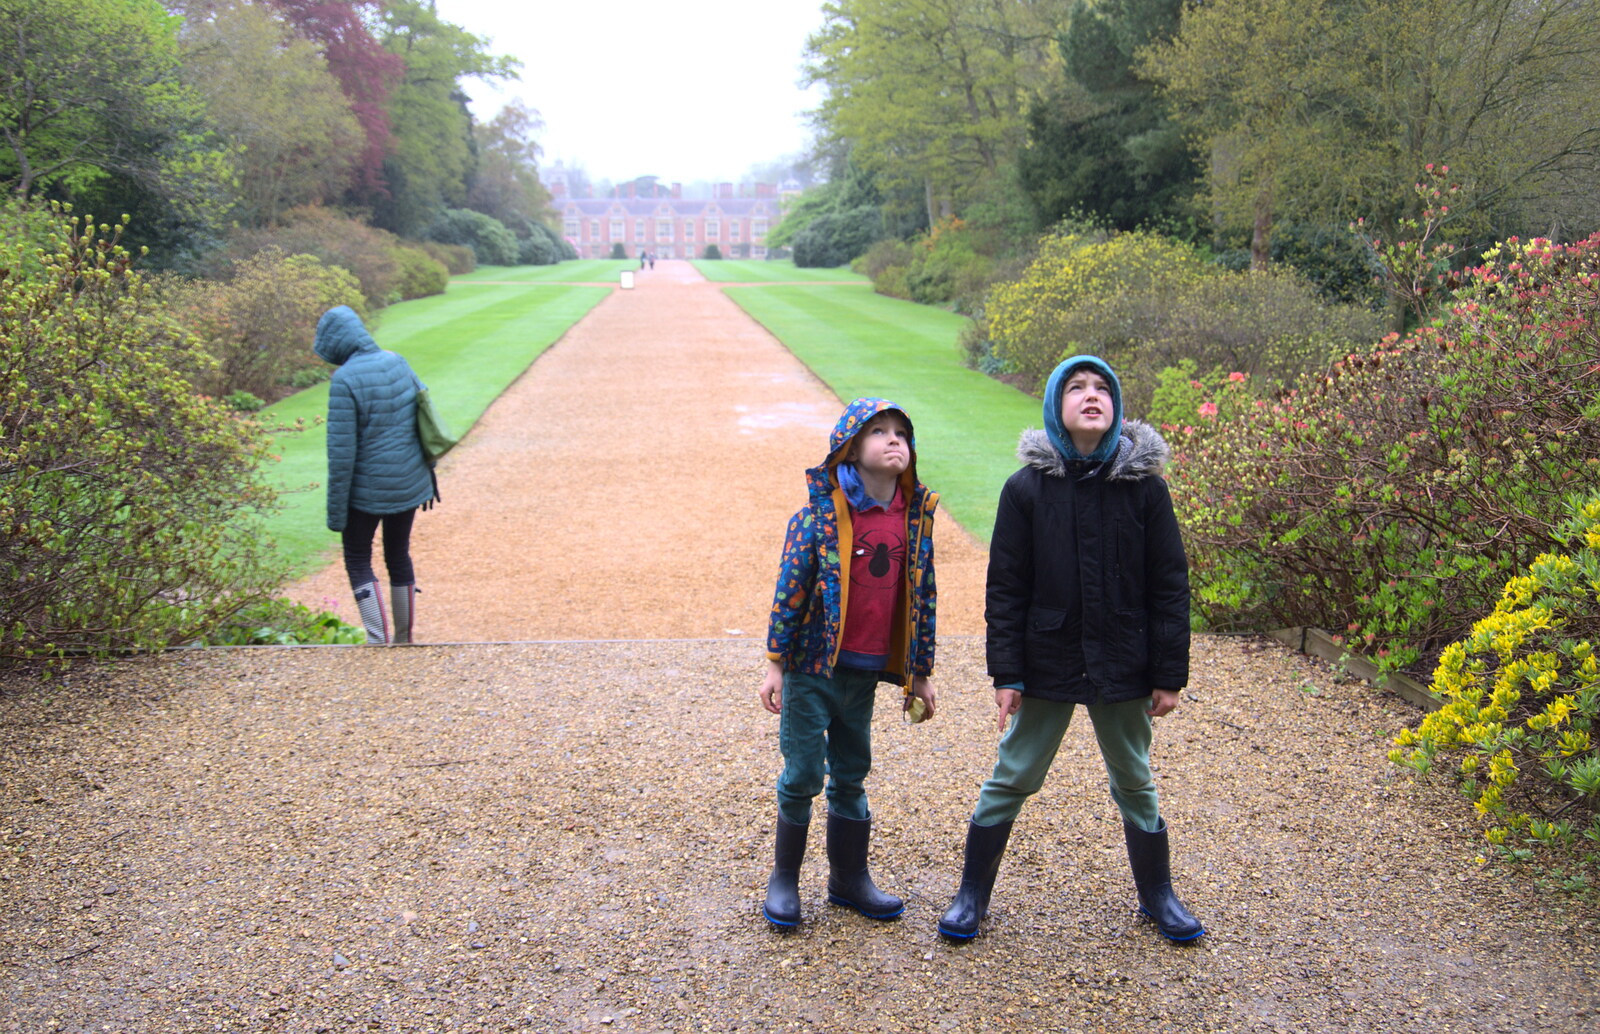 Both the boys are now peering up from A Trip to Blickling Hall, Aylsham, Norfolk - 29th April 2018